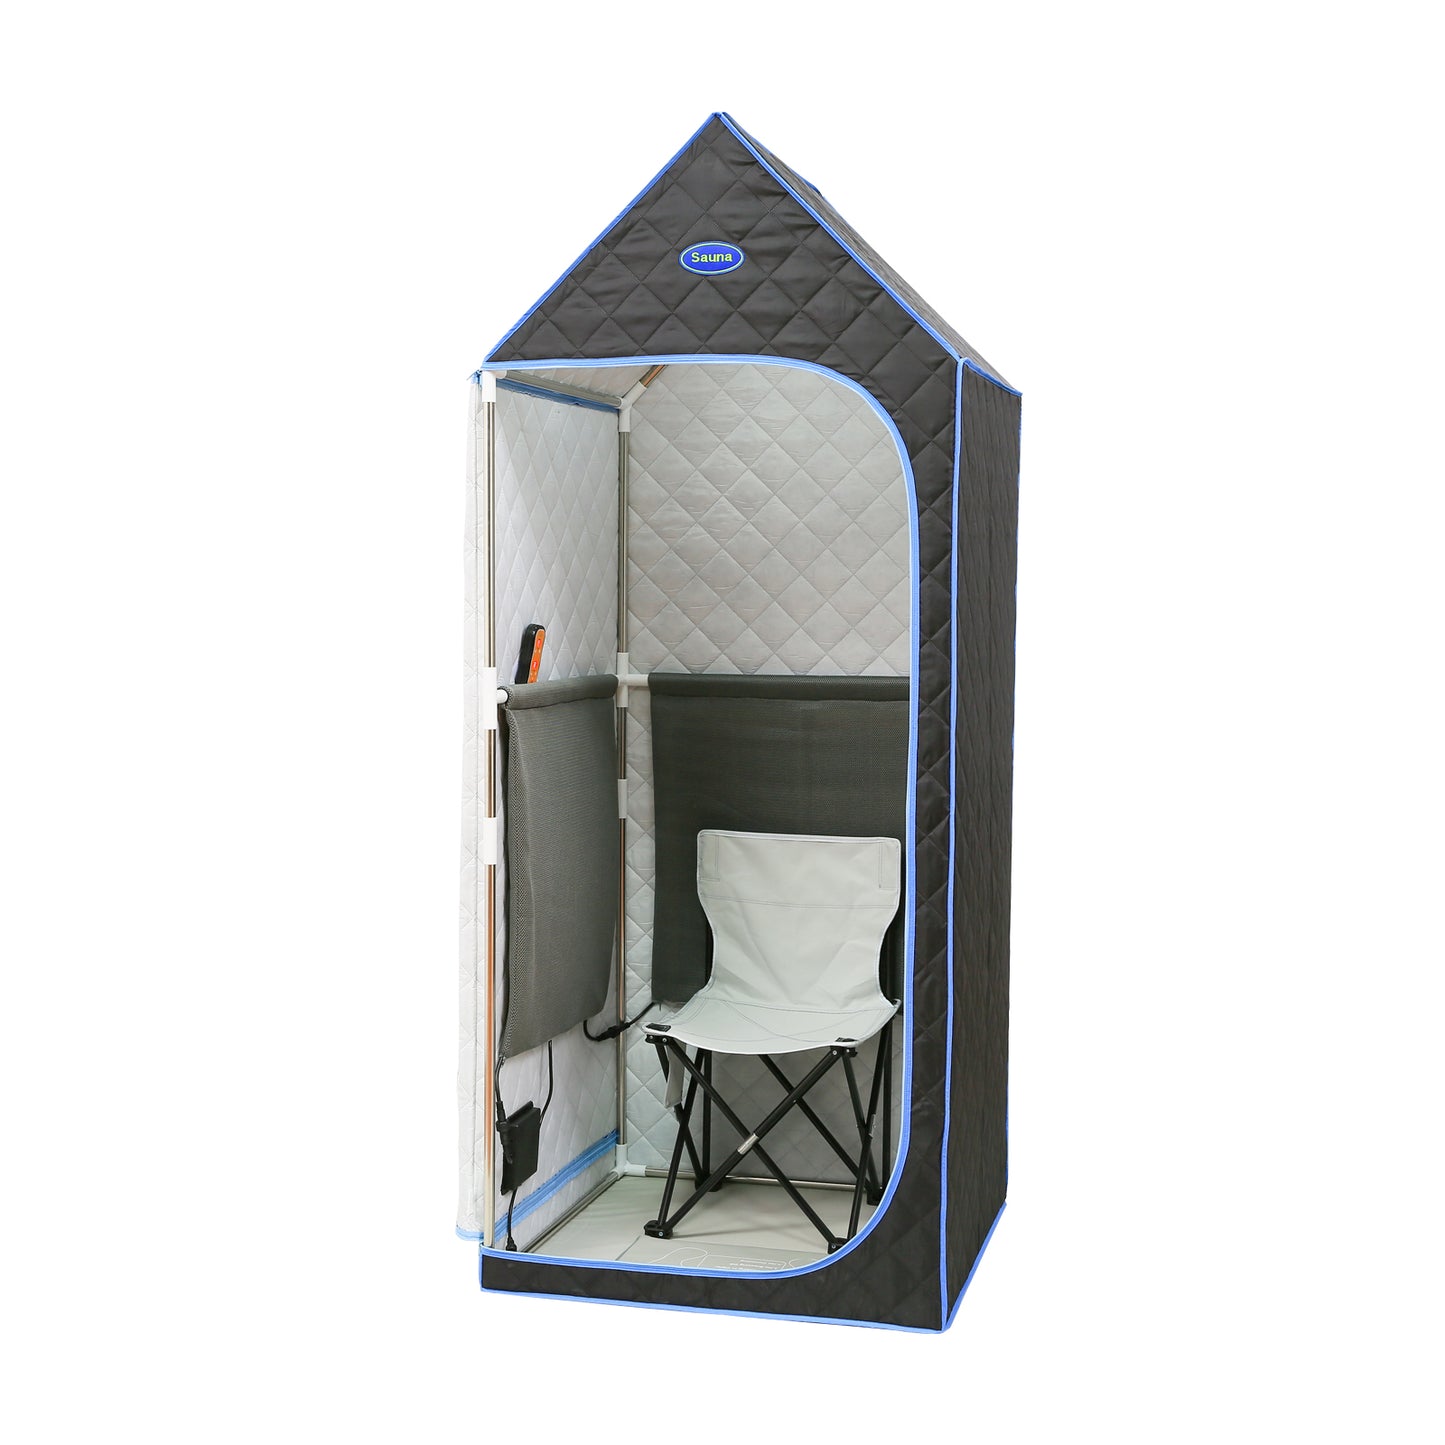 Portable Gothic Roof Plus Type Full Size Far Infrared Sauna tent. Spa, Detox, Therapy and Relaxation at home.Larger Space, Stainless Steel Pipes Connector Easy to Install. FCC Certification--Black